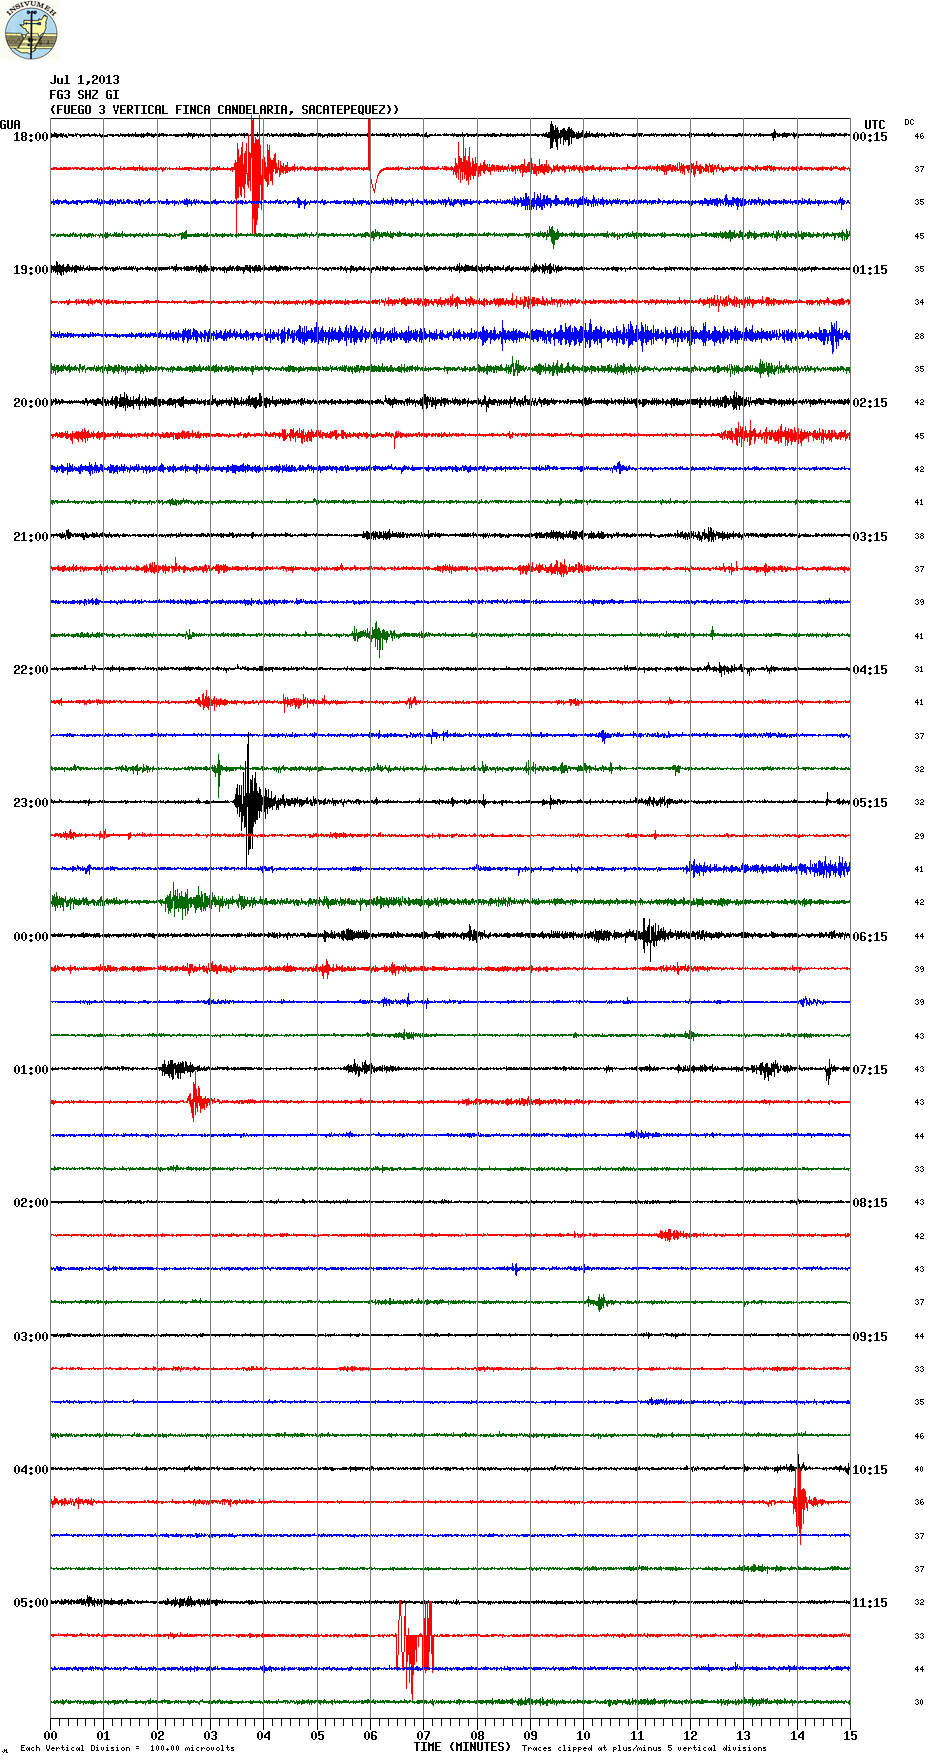 This morning's seismic signal from Fuego (FG3 station, INSIVUMEH)